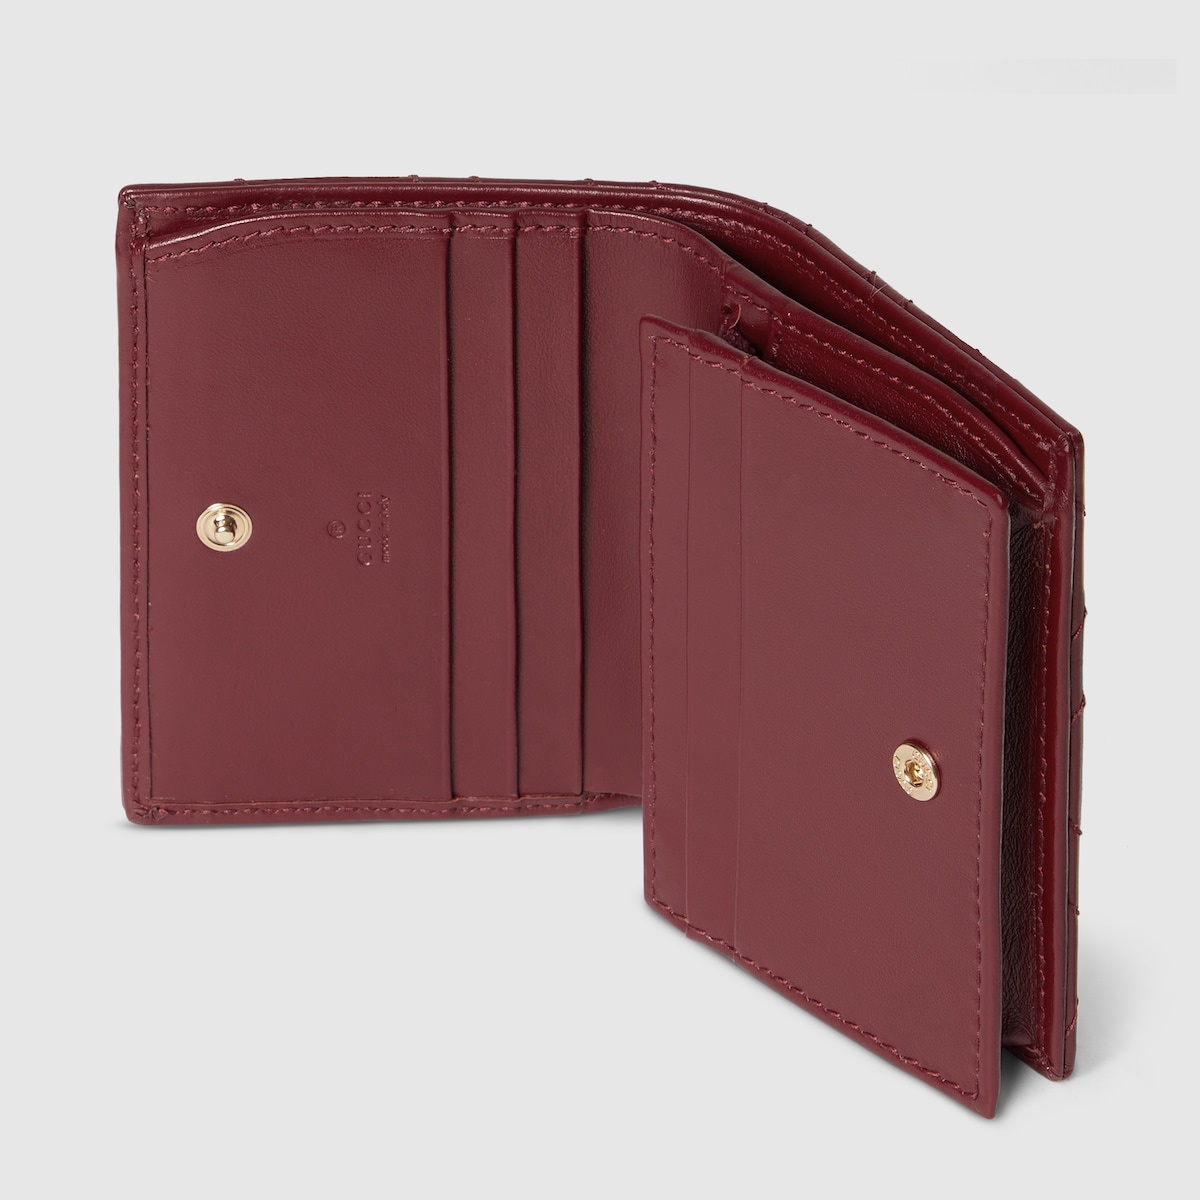 GG Marmont card case wallet - 4